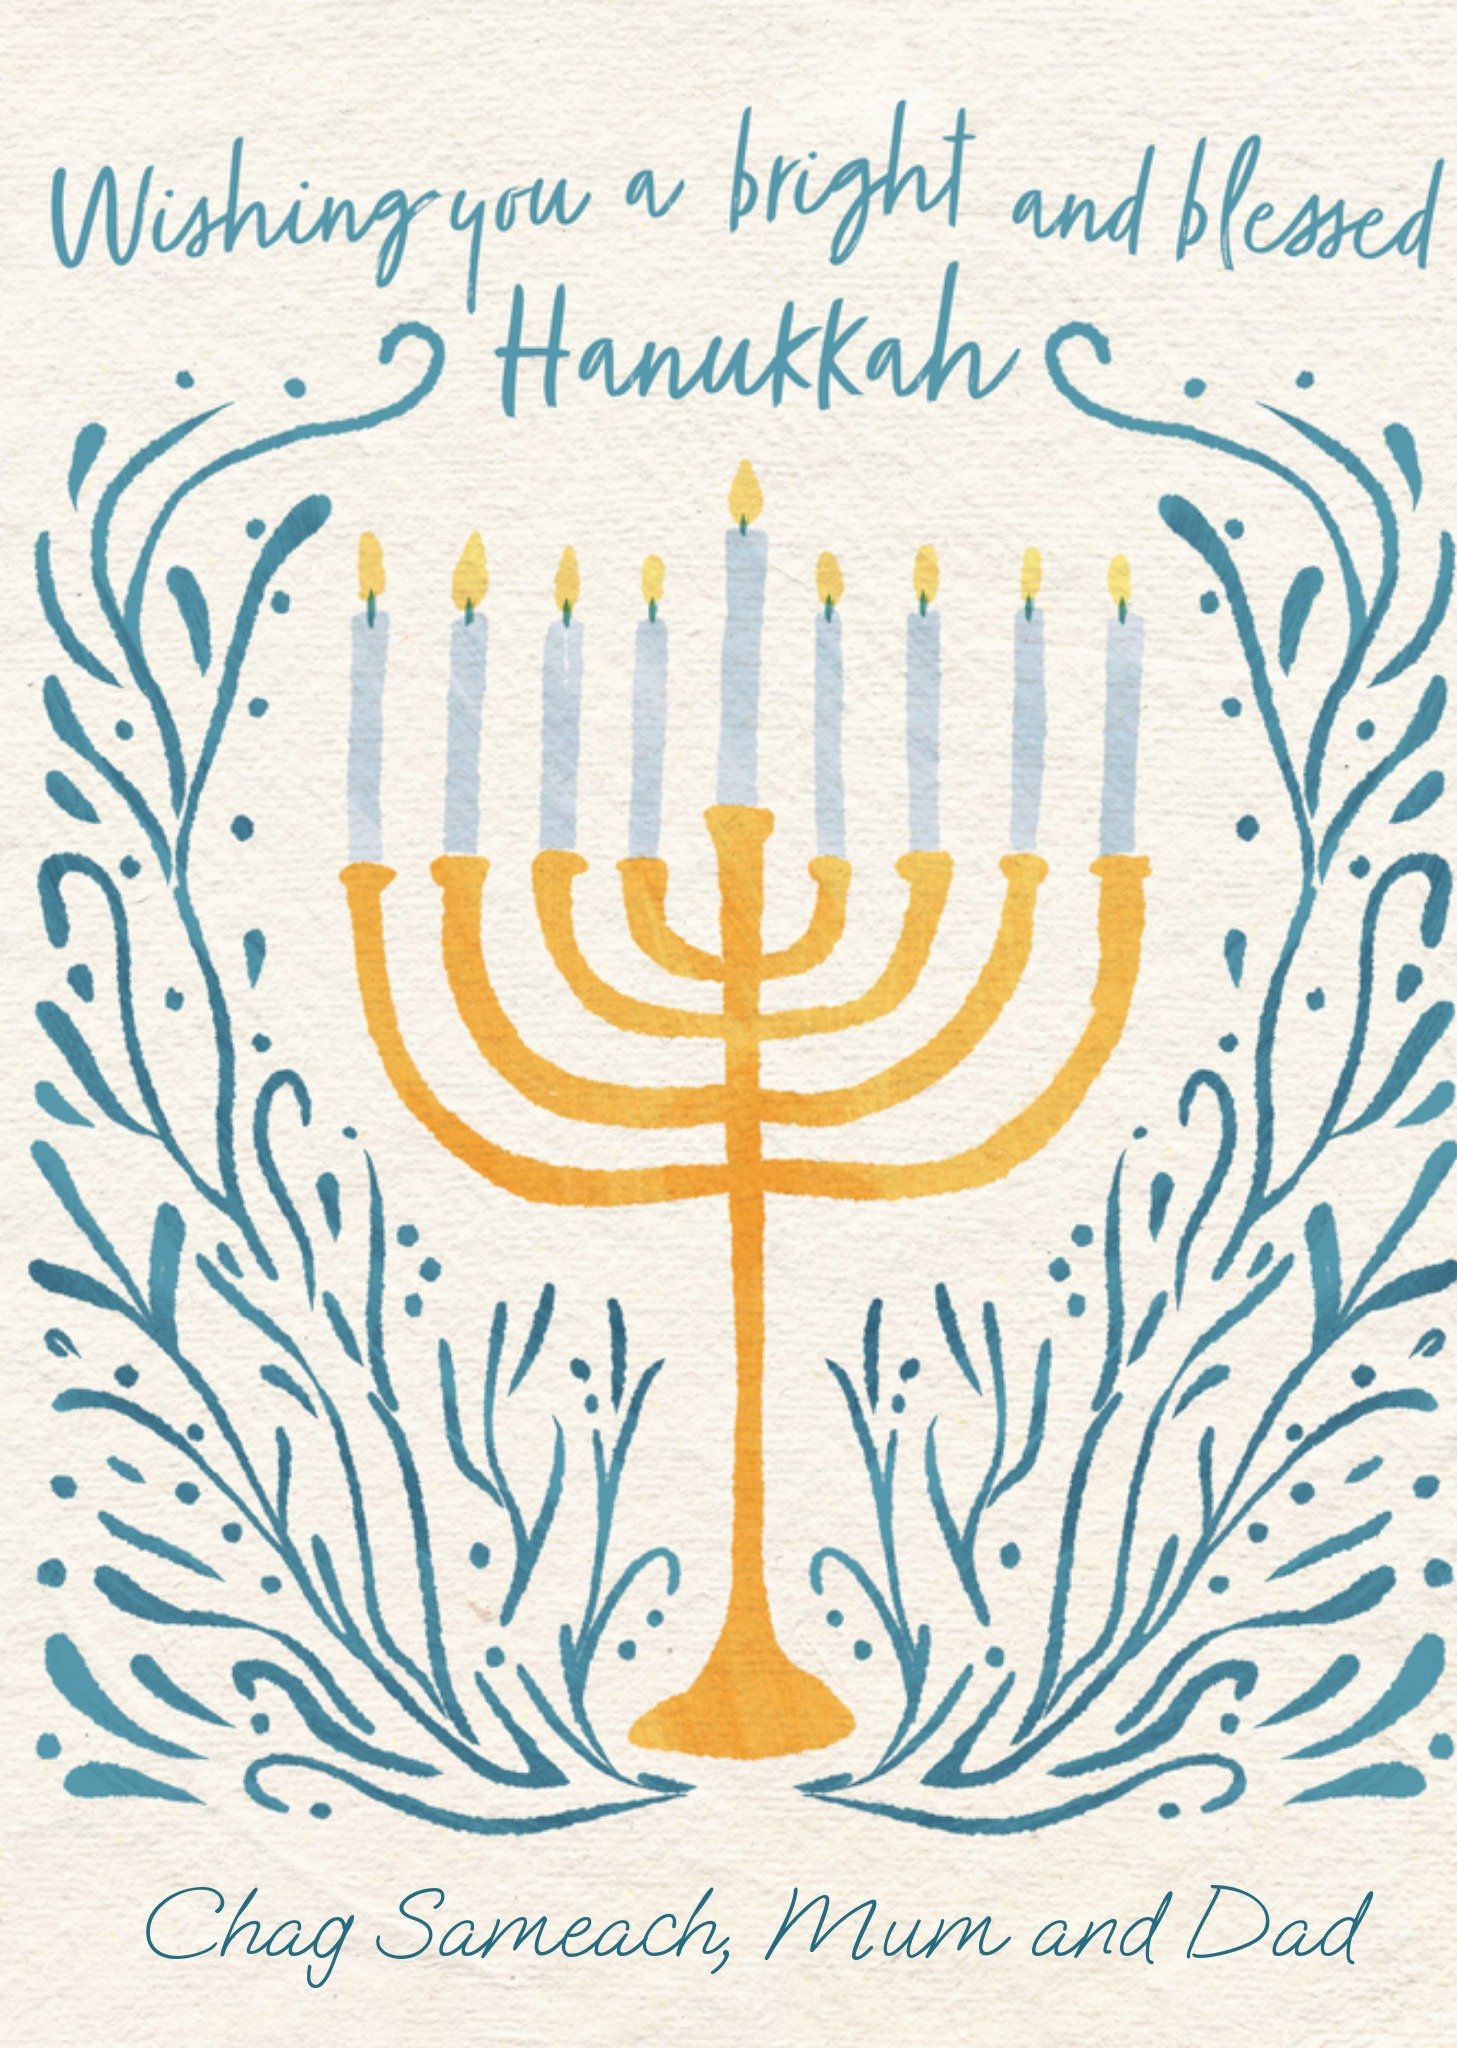 Moonpig Wishing You A Bright And Blessed Hanukkah Card Ecard